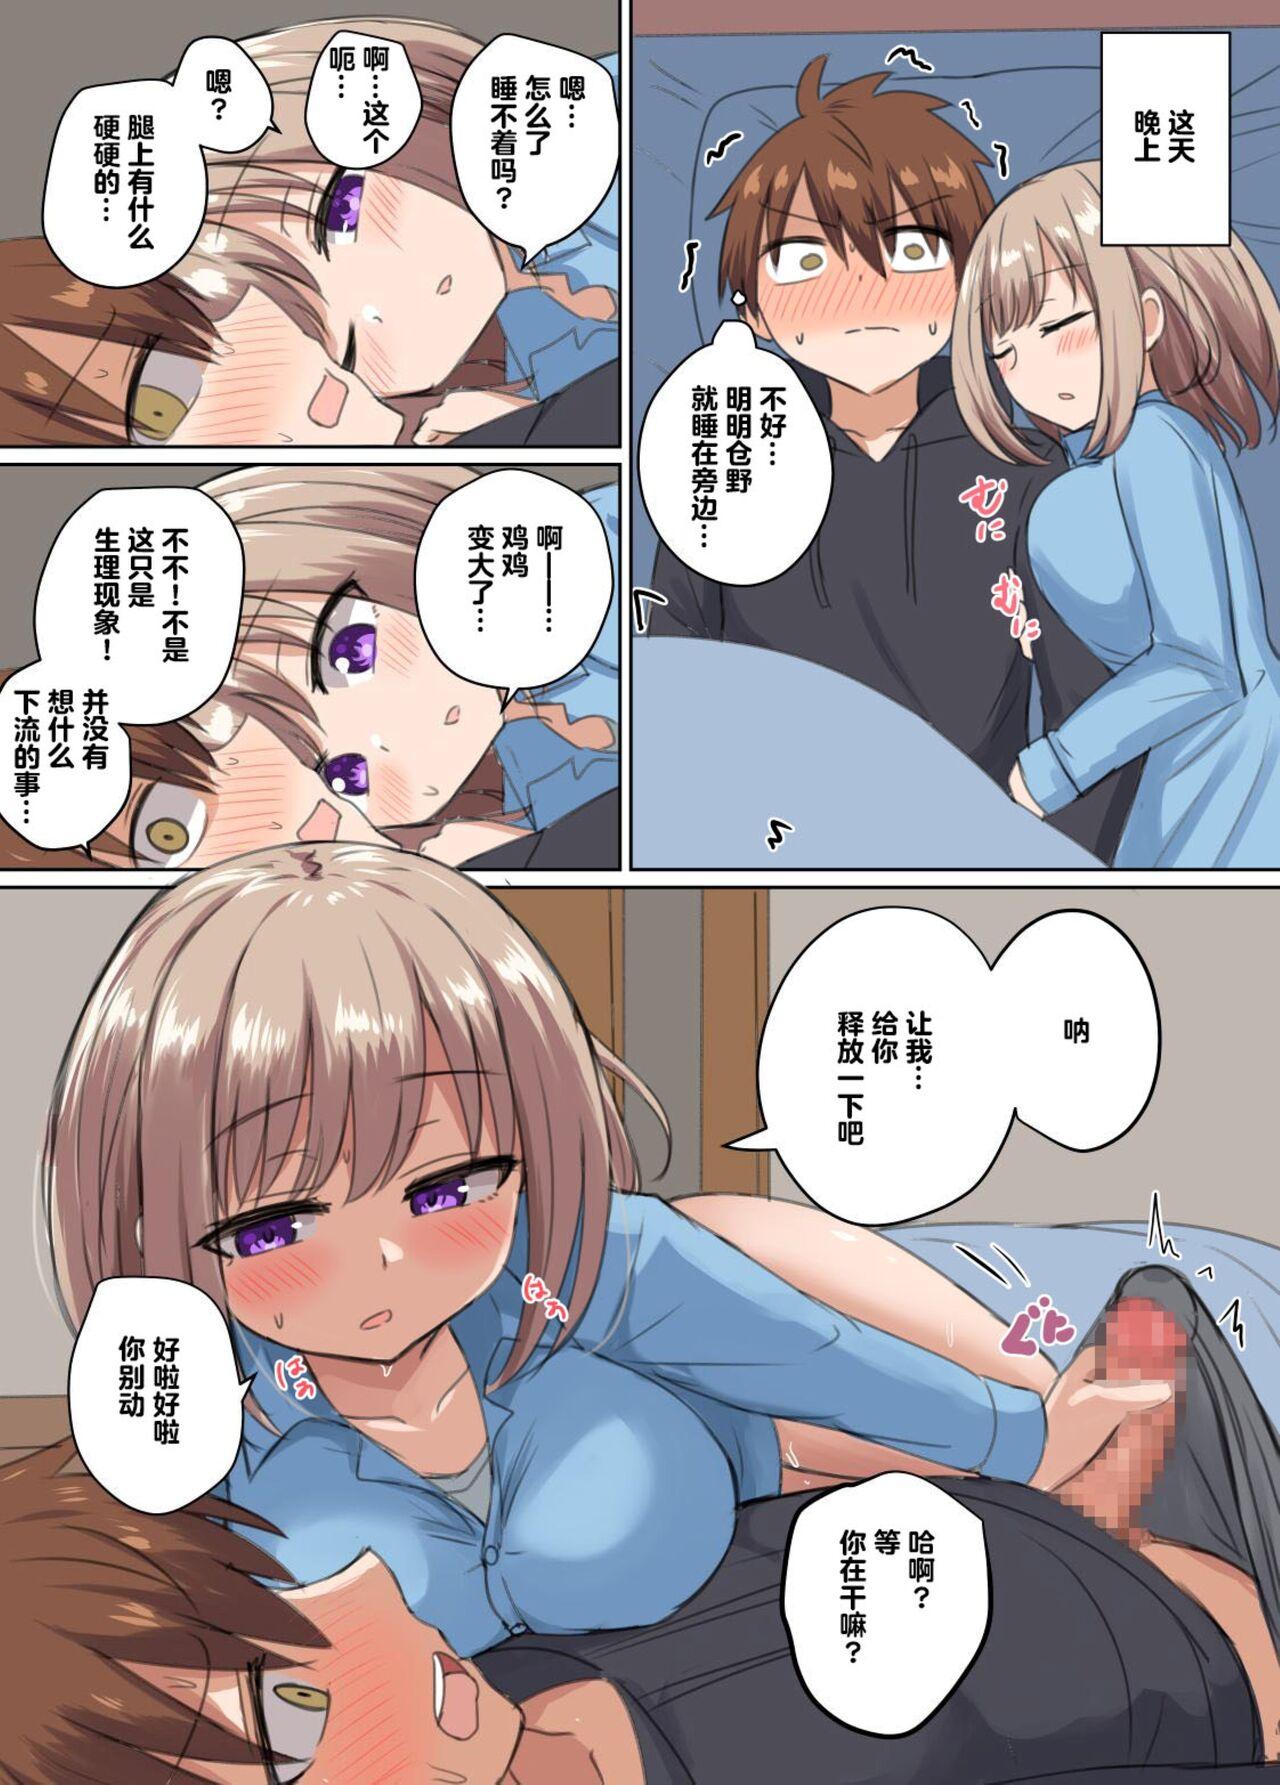 Hardcorend Kyorikan Chikasugite Kuttsuichatta - side by side with you | 距离太近擦枪走火 - Original Asses - Page 6